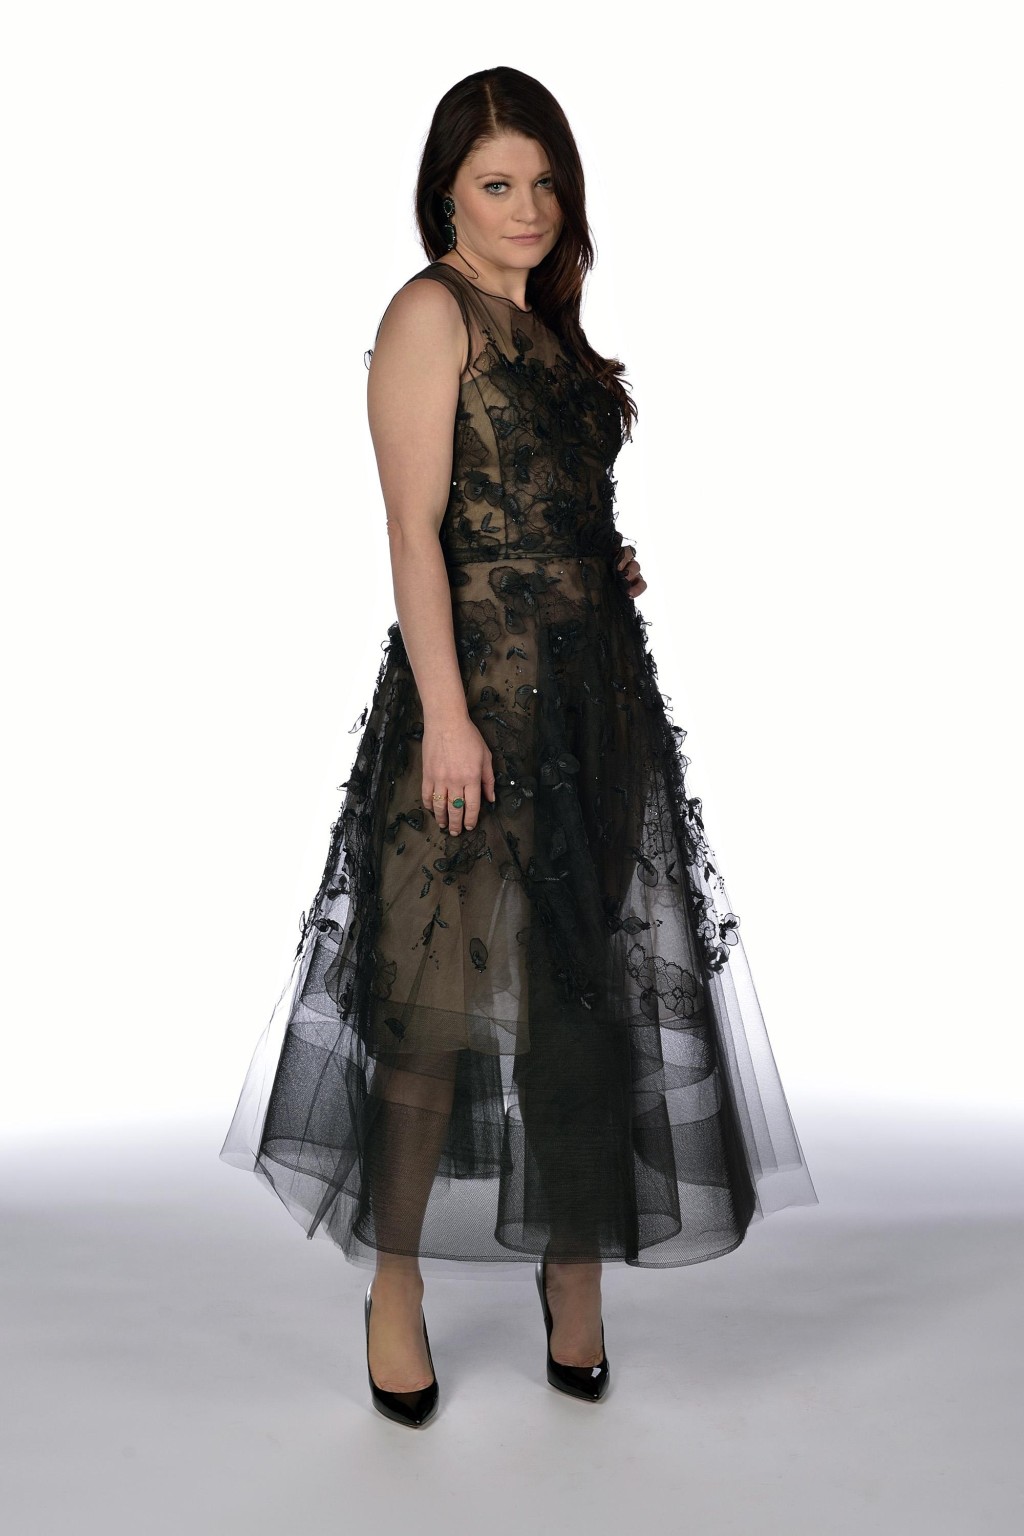 Emilie de Ravin wearing a black lace dress at Once Upon a Time season 4 screenin #75185141